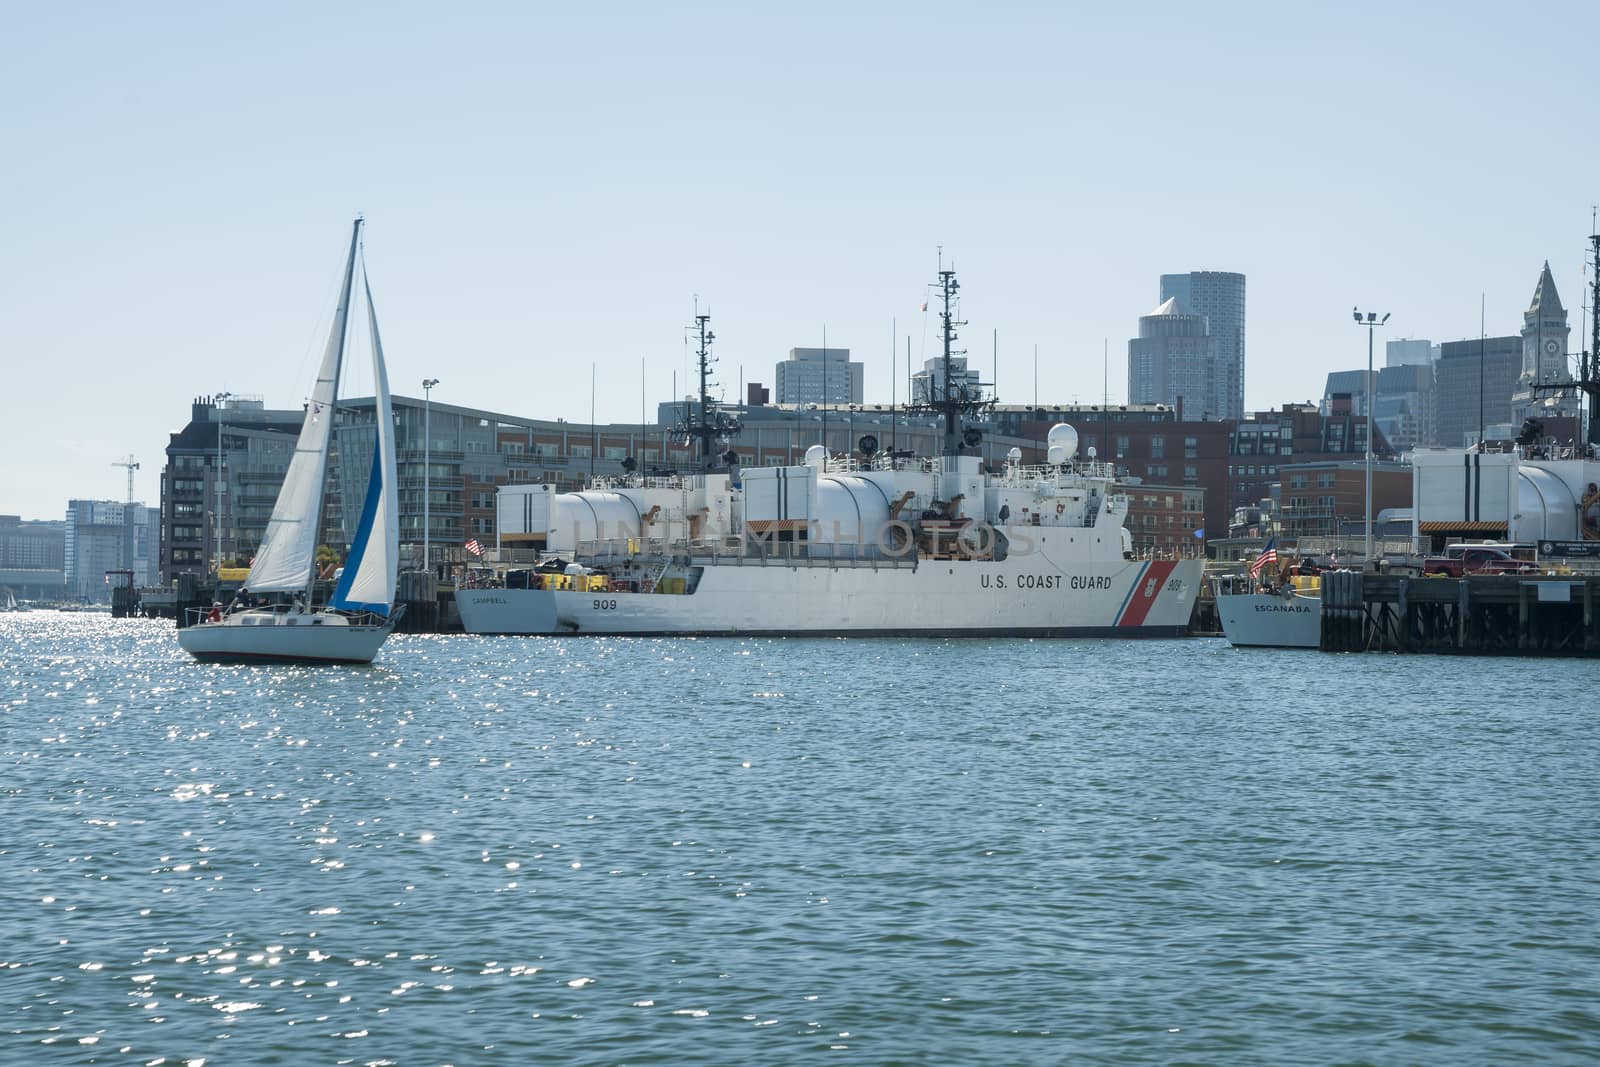 BOSTON, USA - OCTOBER 13; Boston harbor and USS Coastguard boat Campbell moored as yacht sails by on October 13, 2014 in Boston, USA.